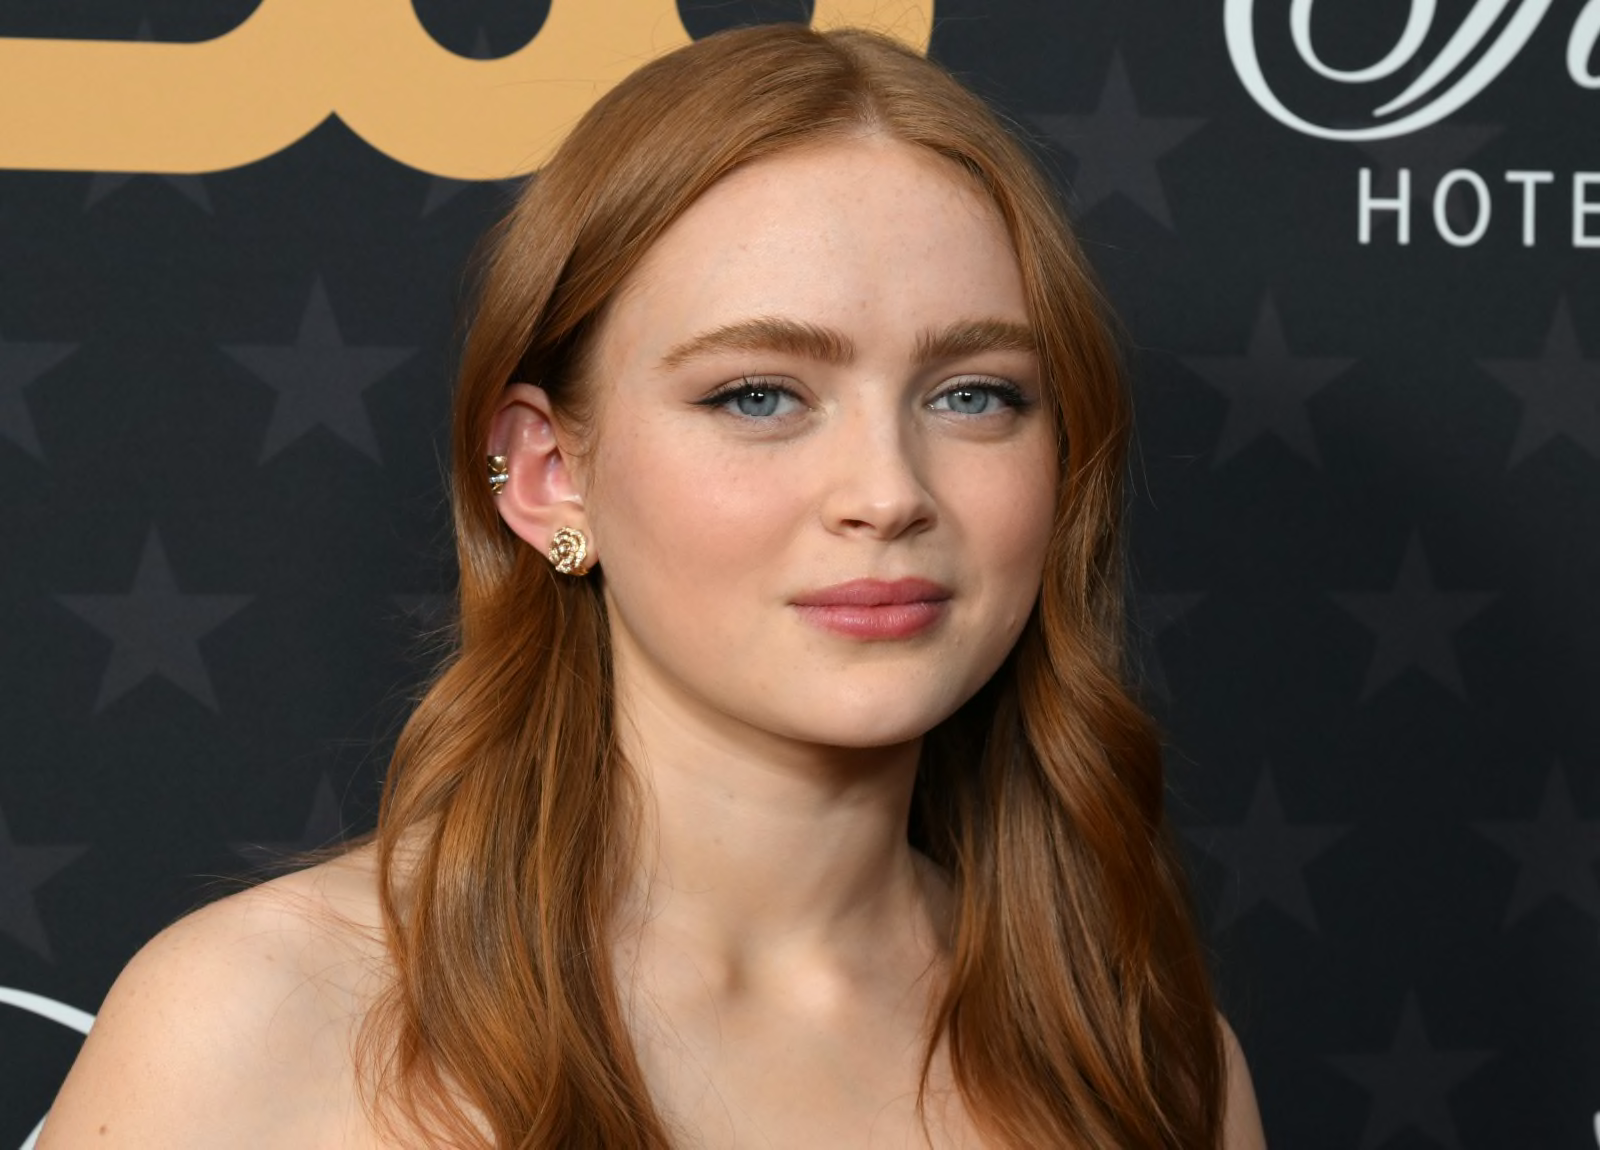 Fans of The Last of Us series want Sadie Sink to play Abby in